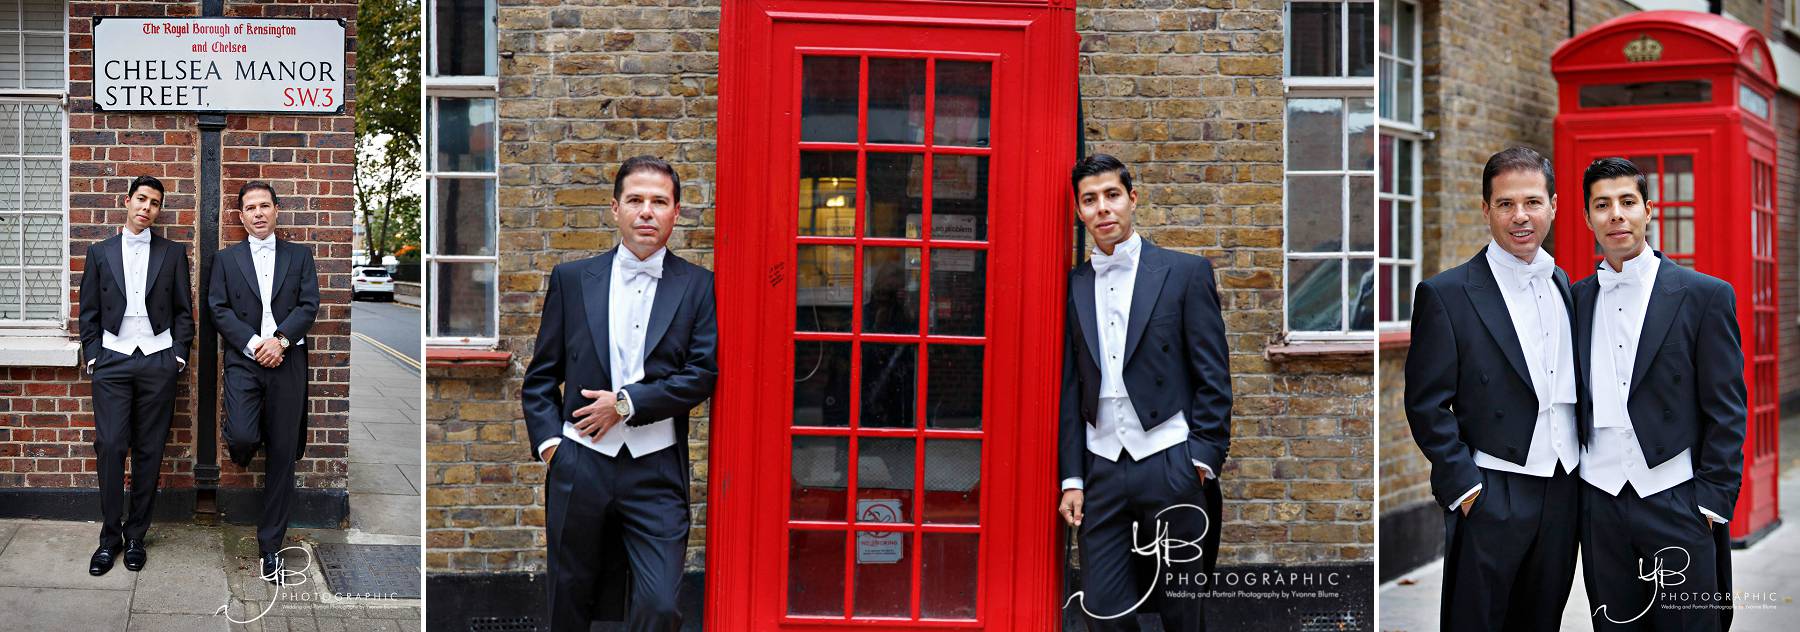 Wedding portraits of two grooms on Chelsea Manor Street in SW3 before their civil ceremony. 